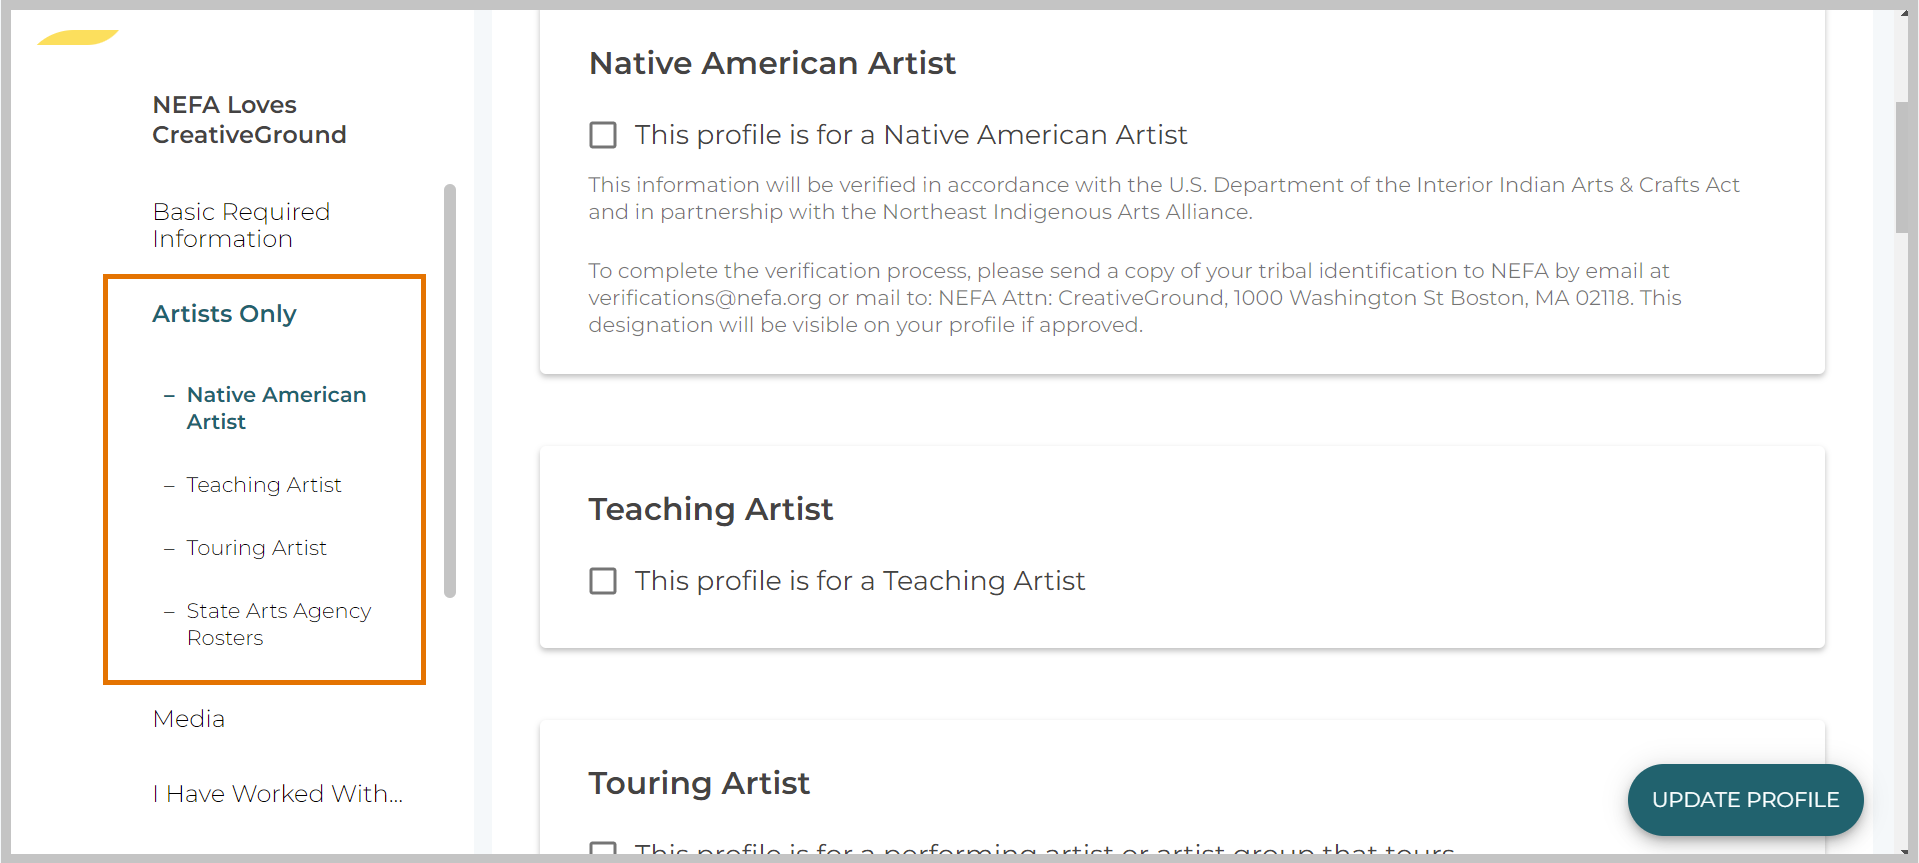 Screenshot shows Artist's Only section of profile